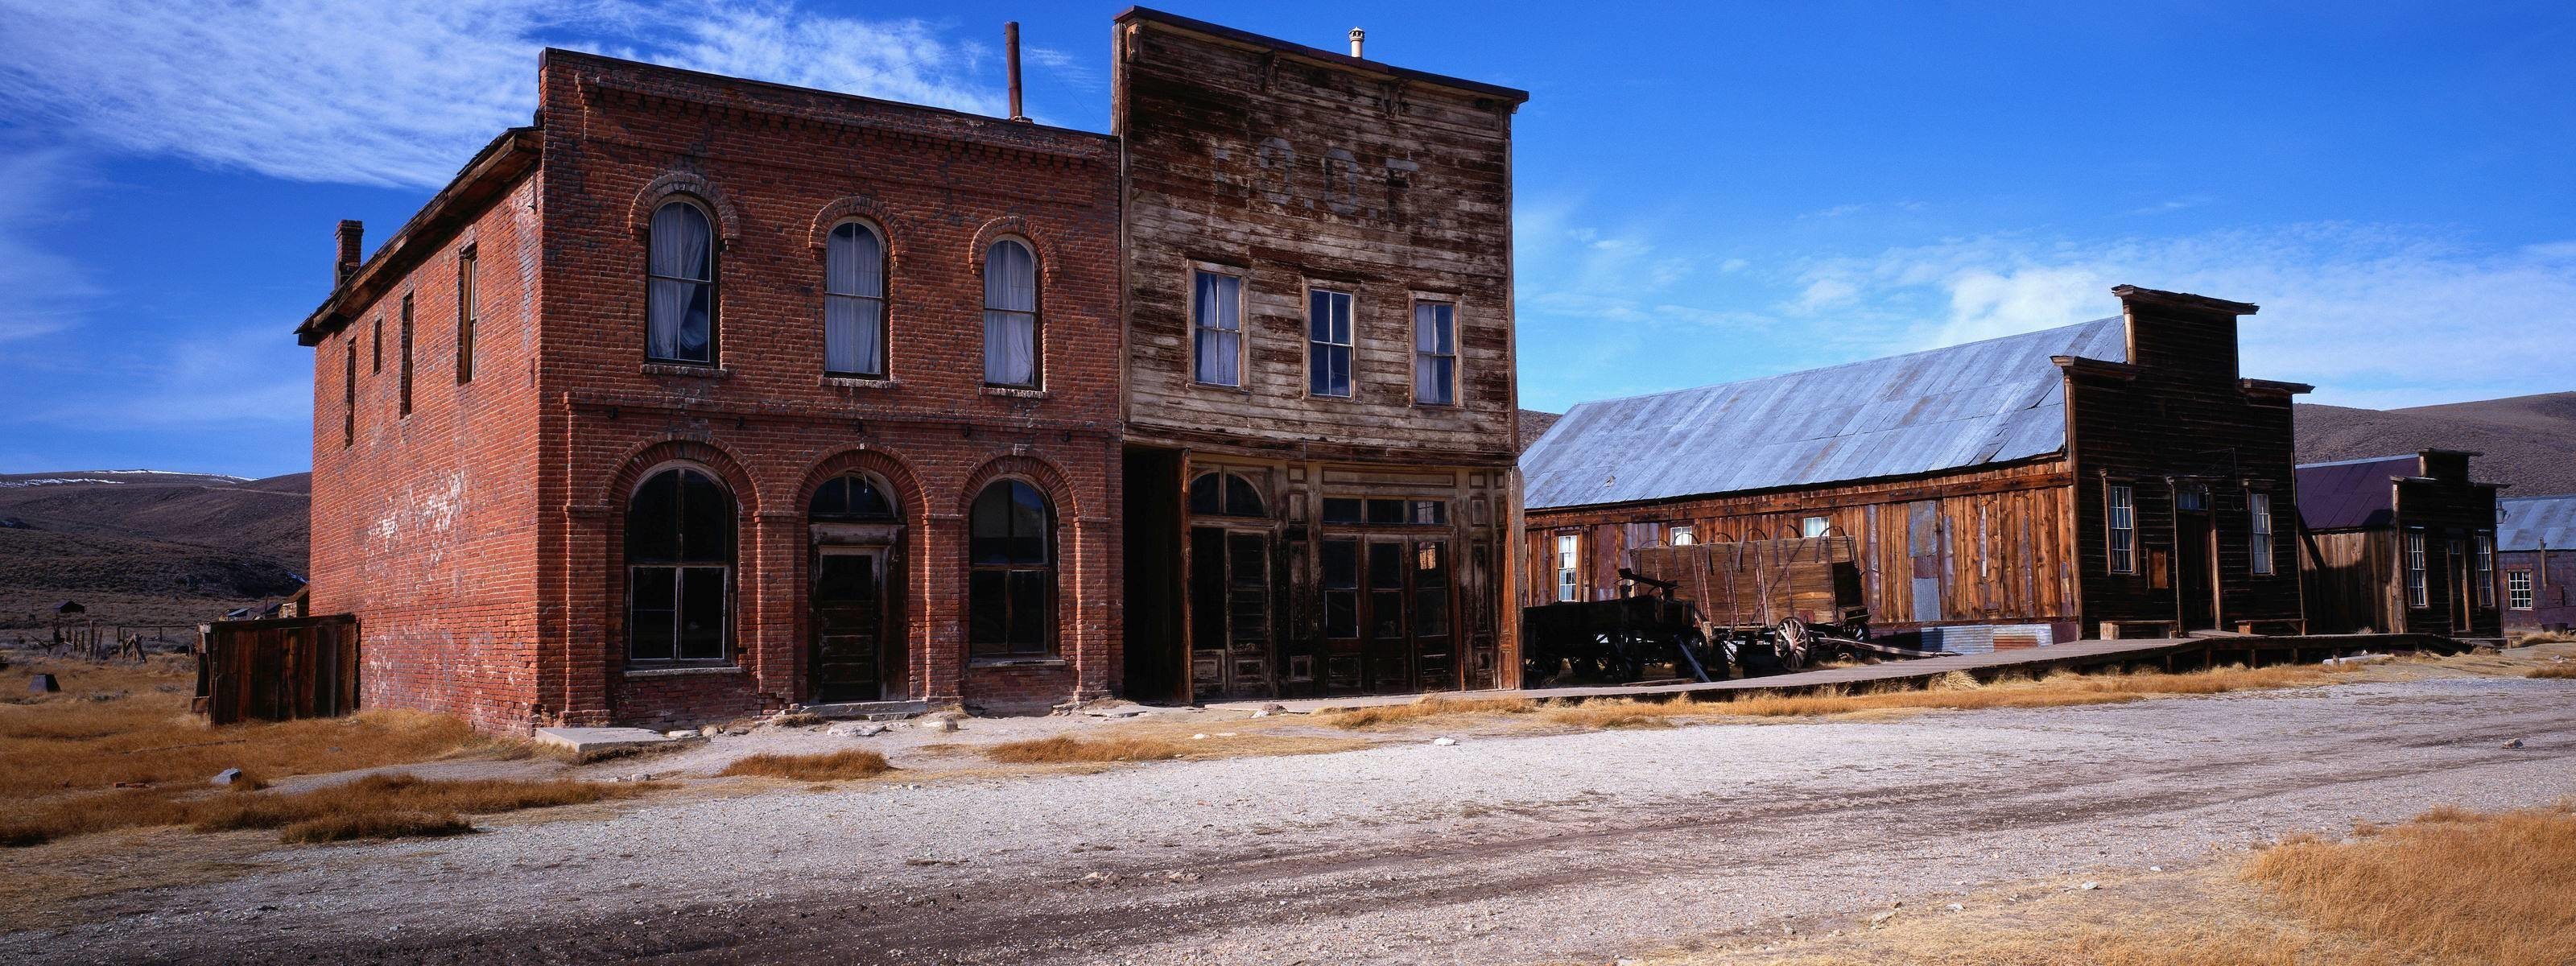 3200x1200 Western Town Backdrop 18 places to go back in time | Amish community,  Tombstone arizona . ...